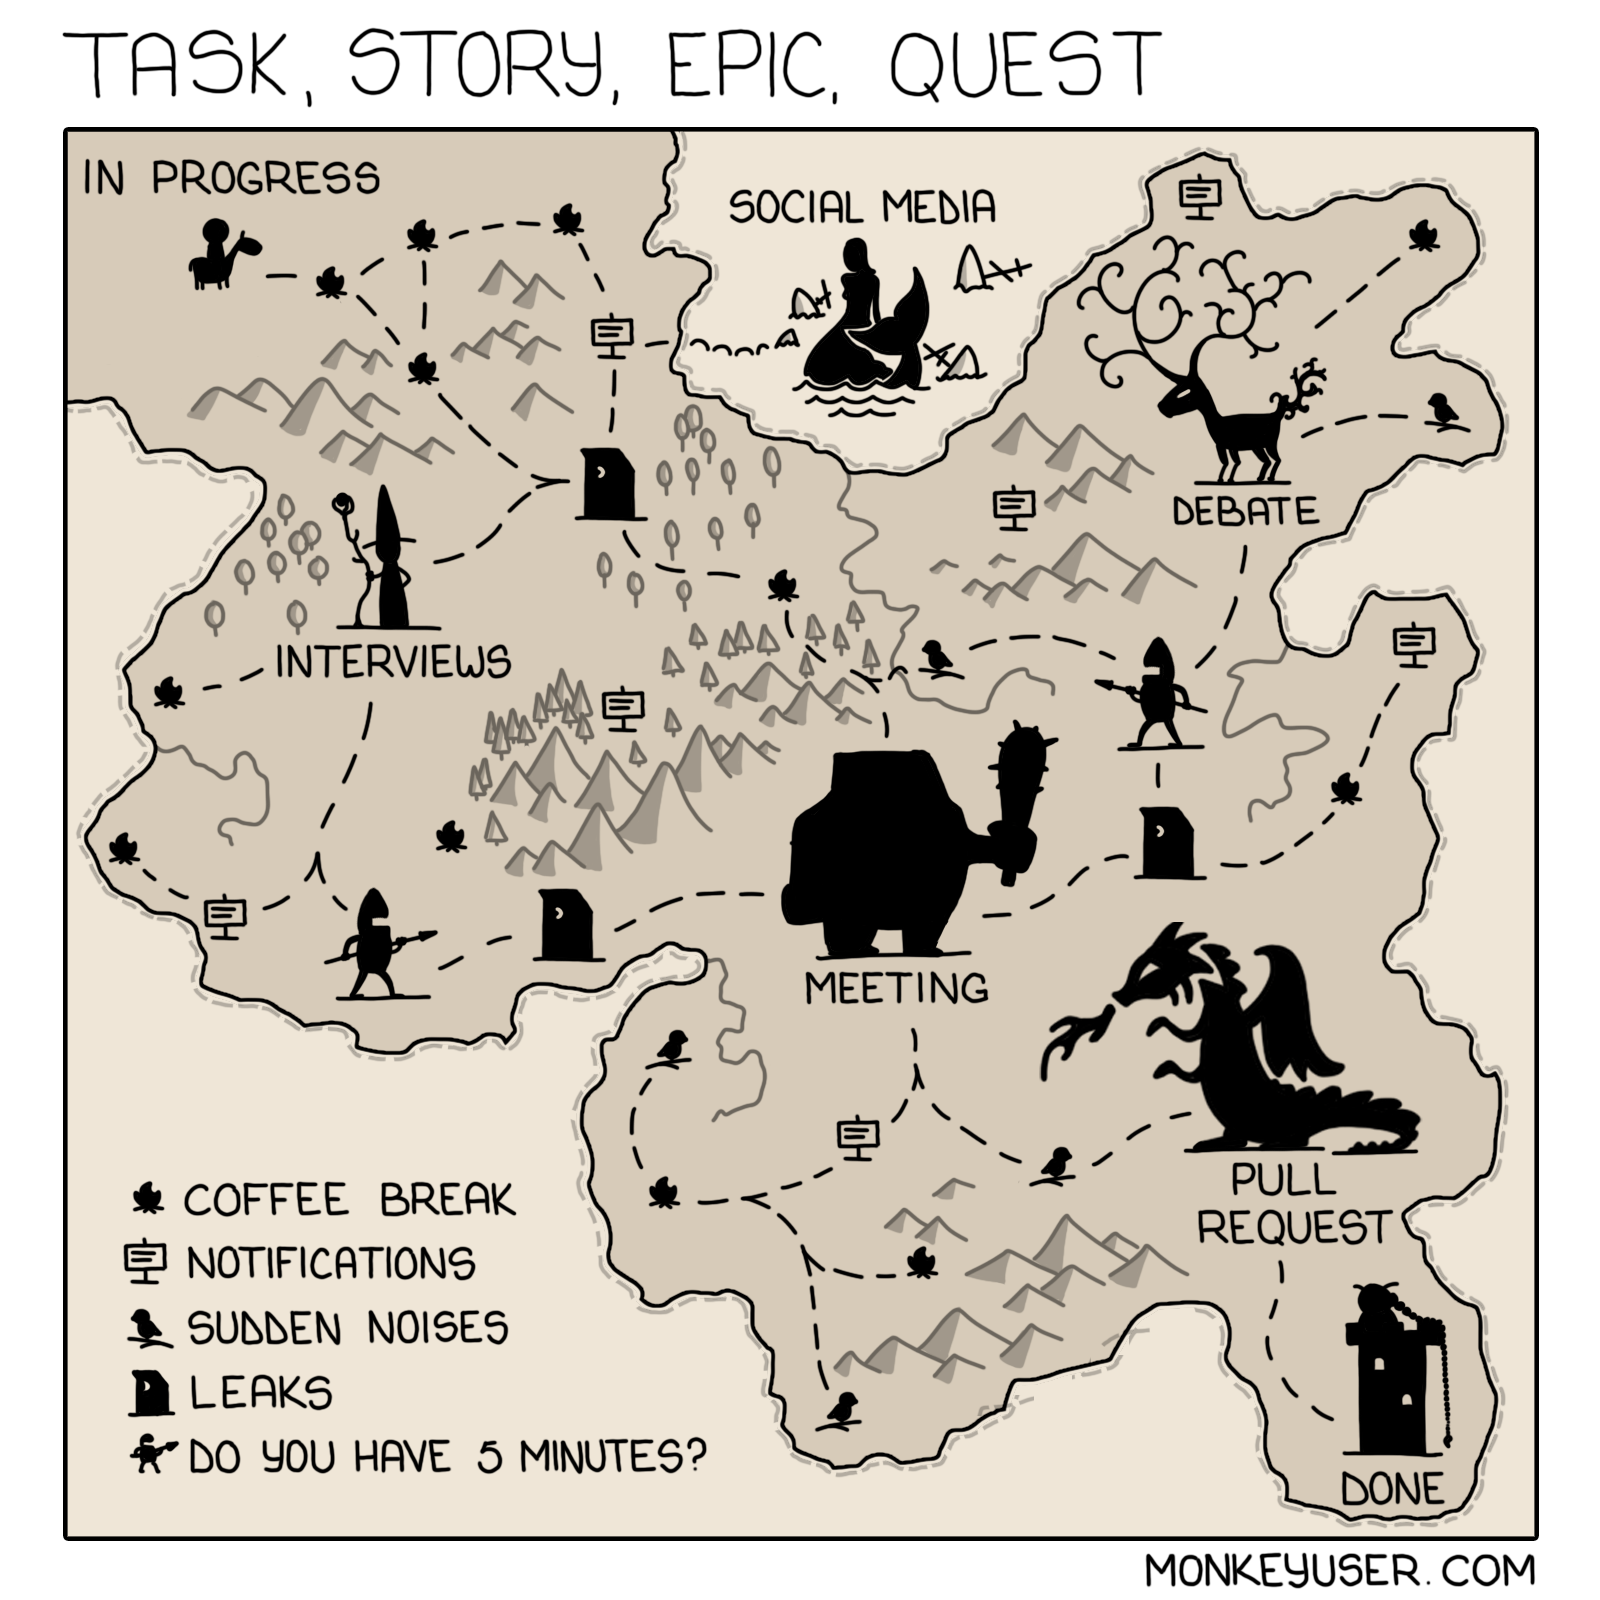 Task, Story, Epic, Quest